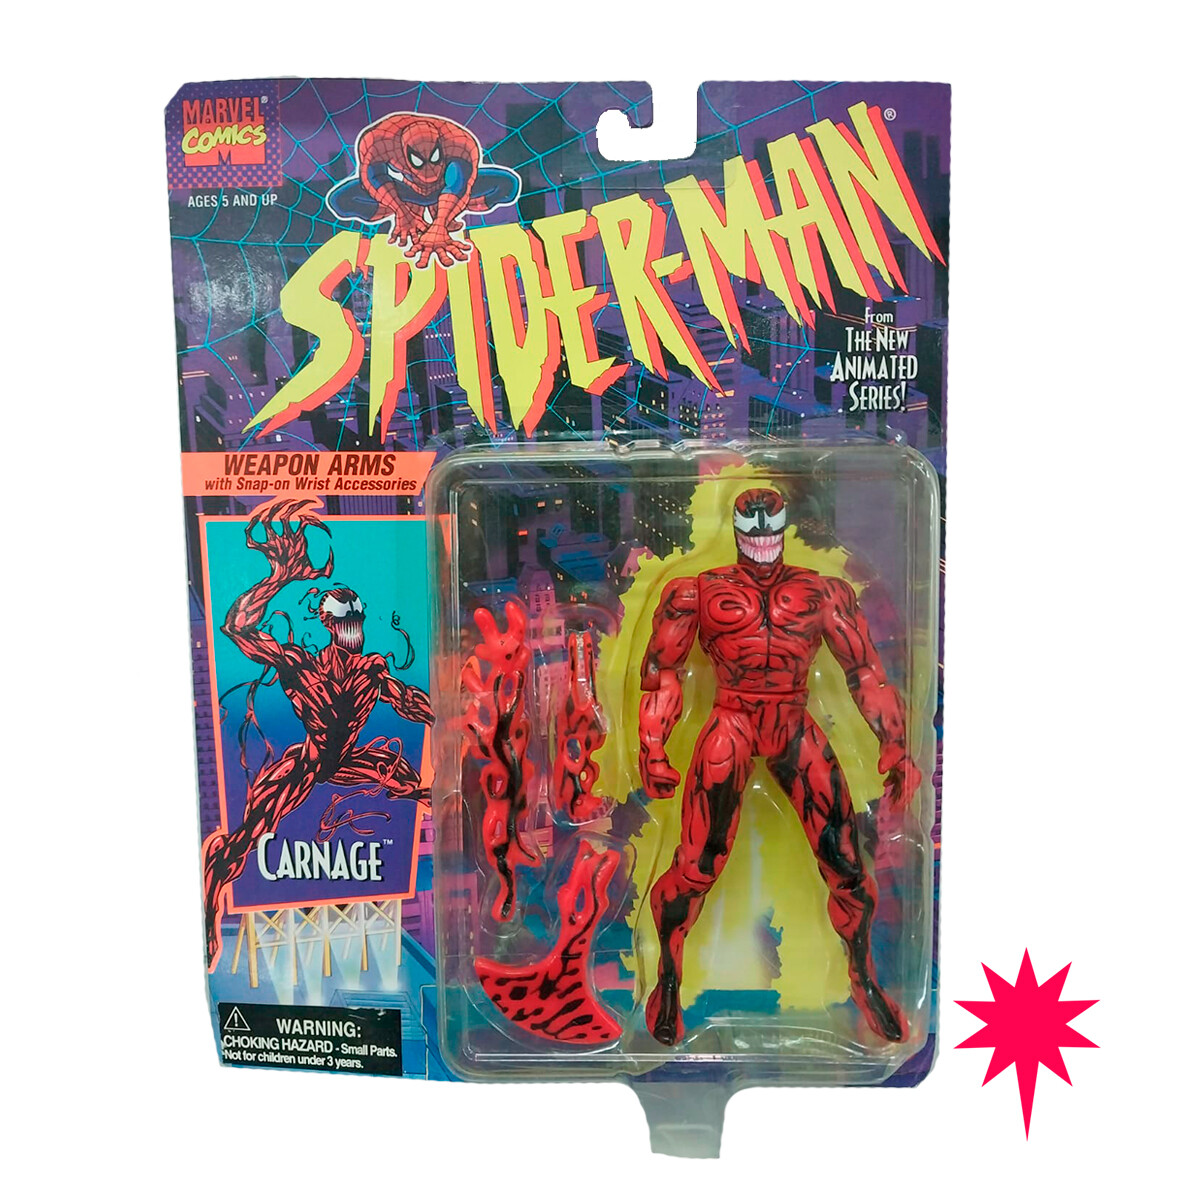 SPIDERMAN ANIMATED SERIES CARNAGE WEAPON ARMS 1994 